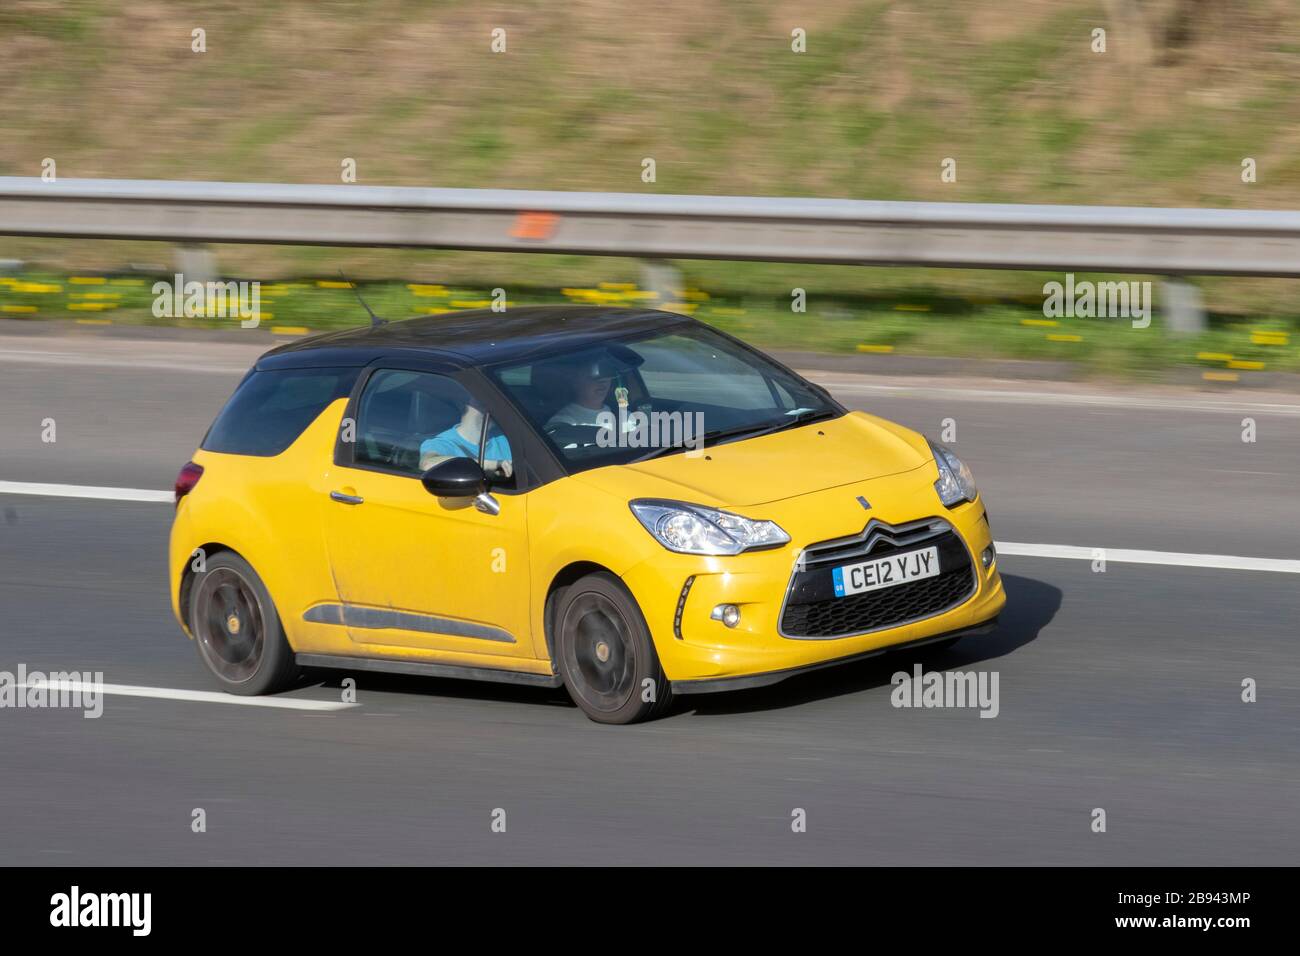 2012 yellow Citroën DS3 Dstyle + E-HDI; UK Vehicular traffic, road transport, modern vehicles, saloon cars, vehicle driving, roads & motors, motoring south-bound on the M61 motorway highway Stock Photo